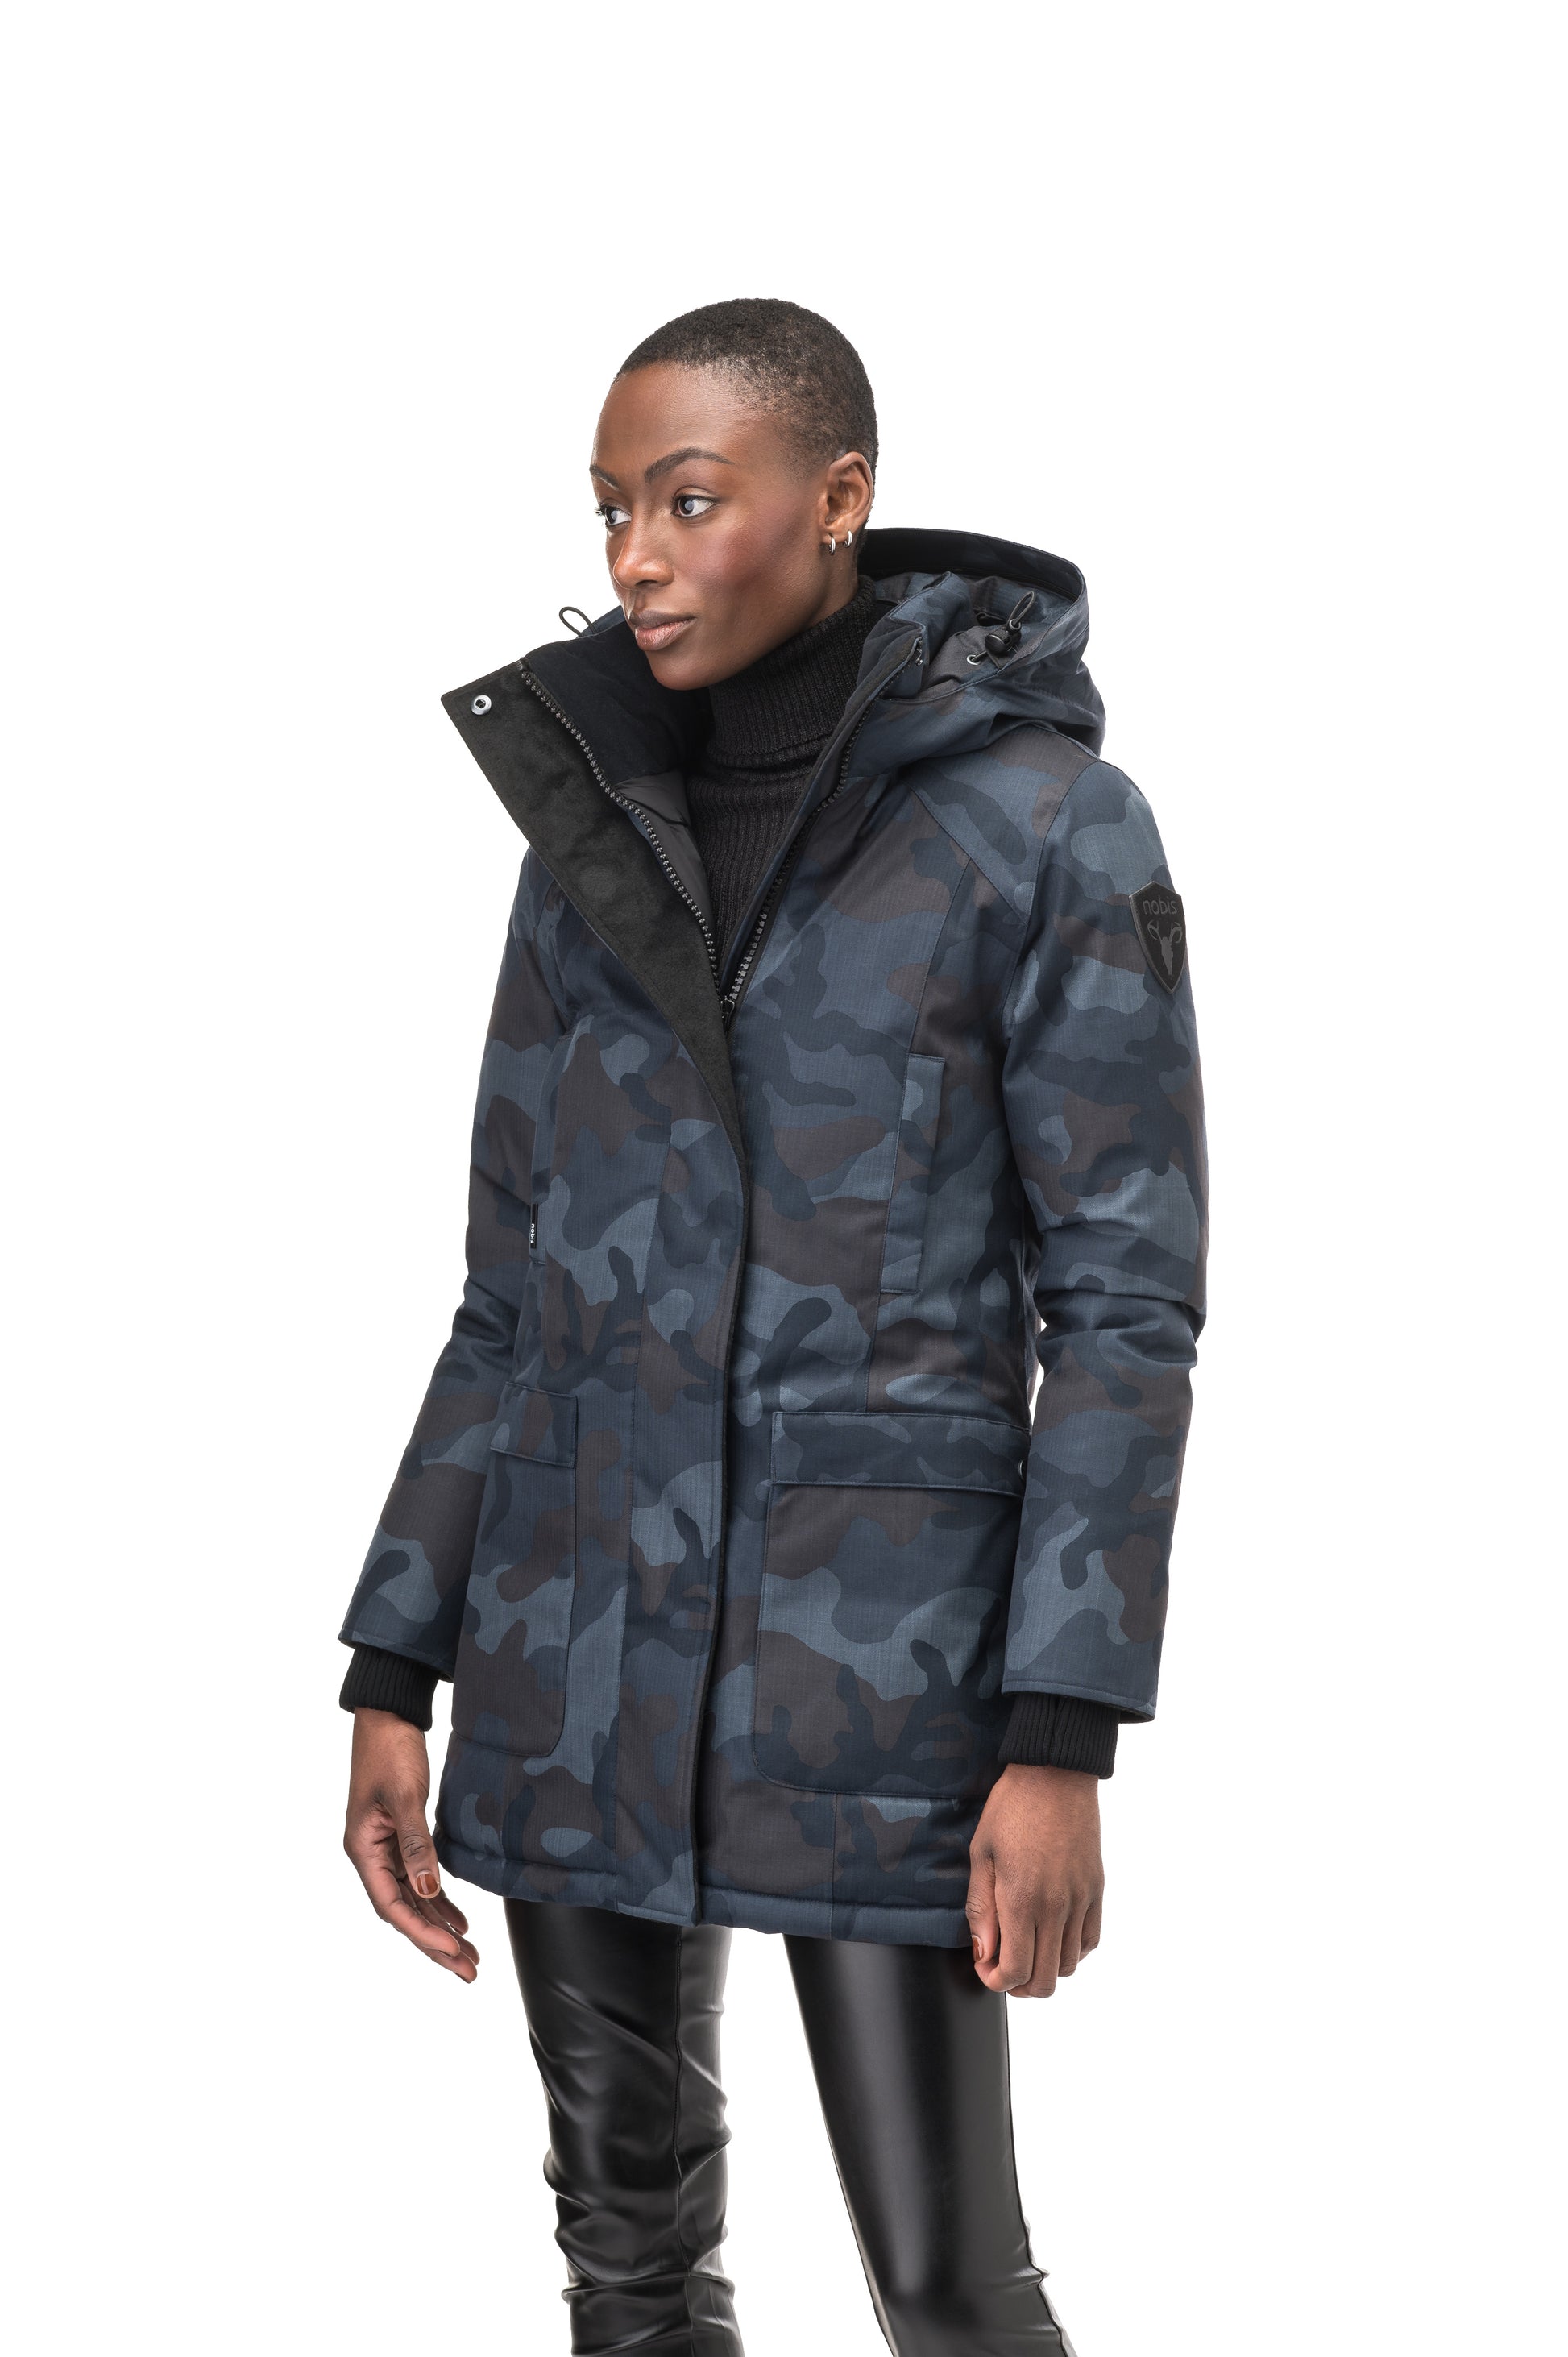 Women's down filled parka that sits just below the hip with a clean look and two hip patch pockets in Navy Camo